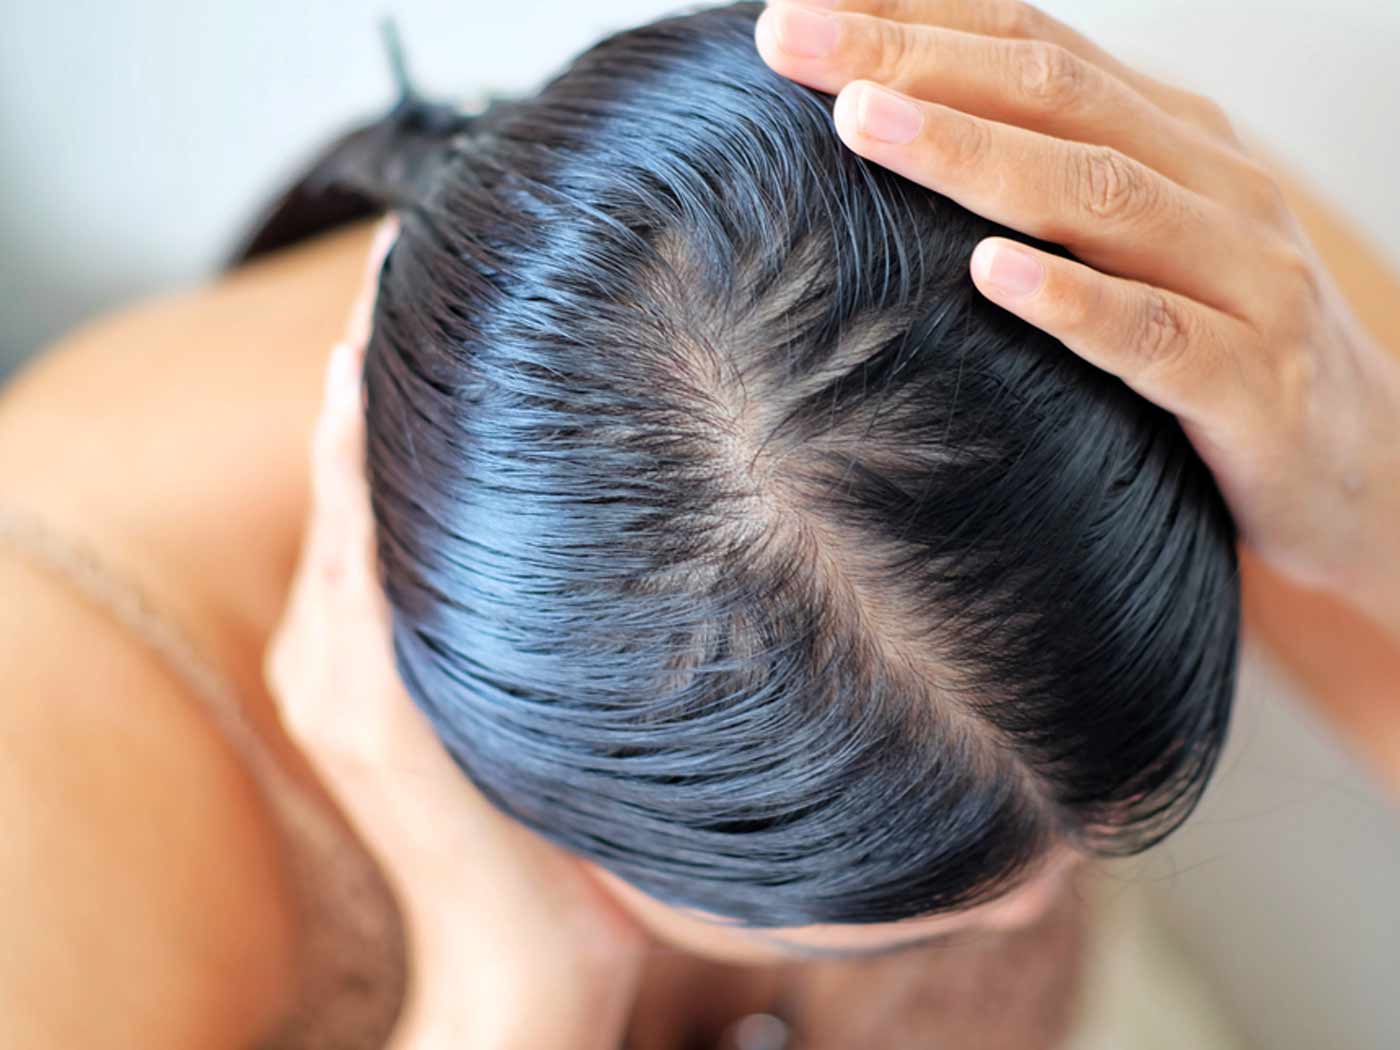 How to get rid of Greasy scalp